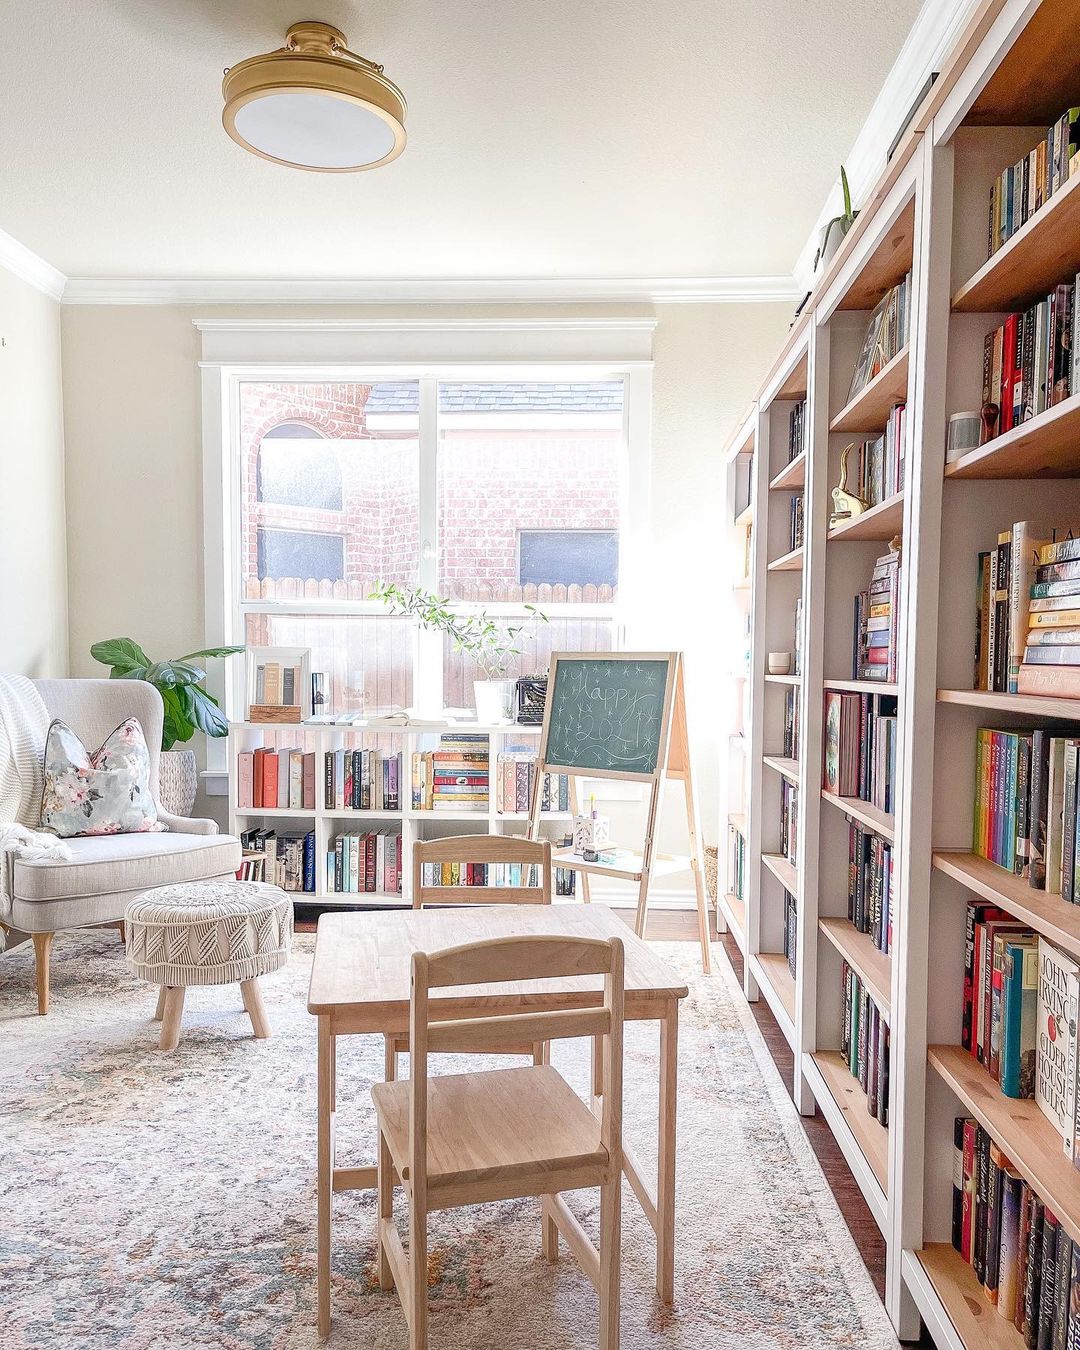 Home library that doubles as a homeschool classroom. Photo by Instagram User @ahousewithbooks